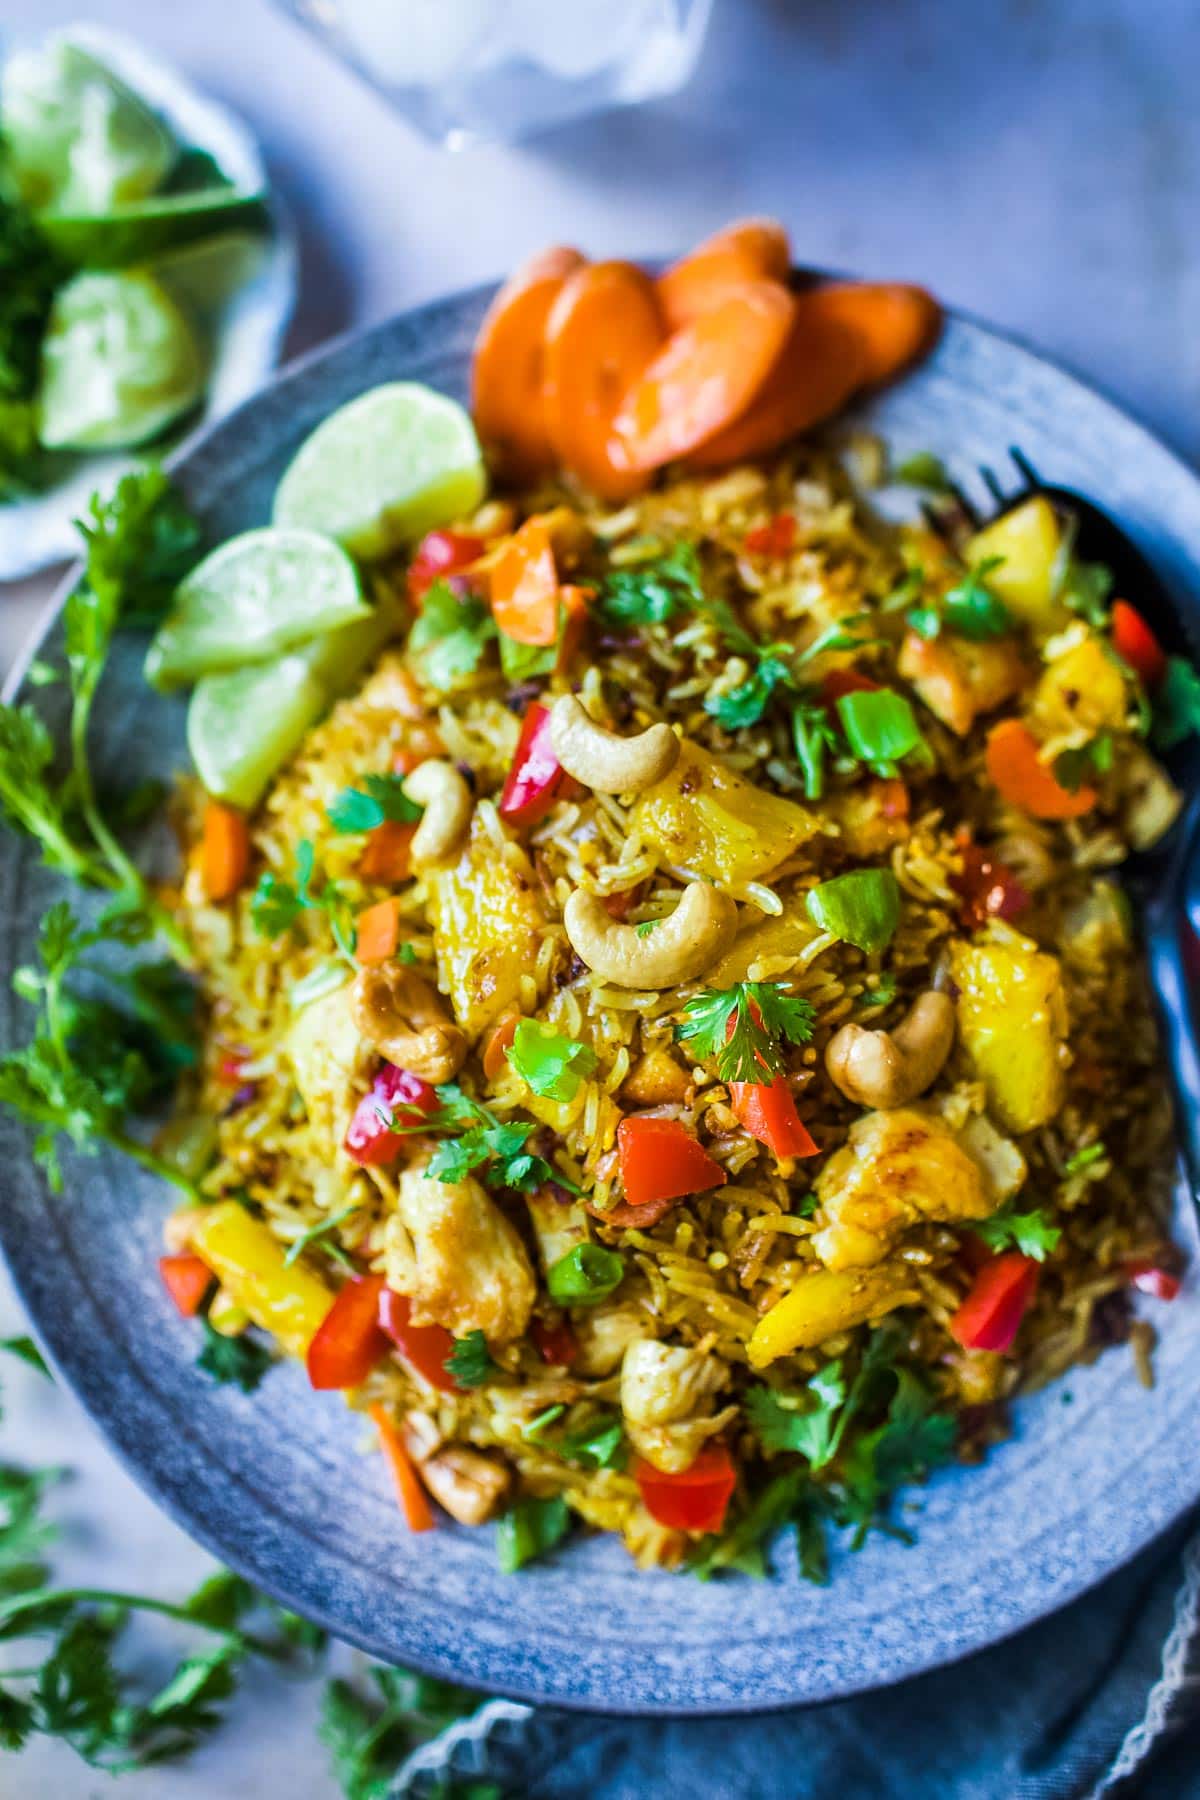 This Pineapple Fried Rice holds all the Thai flavors of spicy, sweet, and salty with a perfect tang from the pineapple and tops off with a crunchy nutty taste of cashew. It is a delicious Thai dish that is fast to put together. Vegan adaptable! #thaipineapplefriedrice #pineapplefriedrice